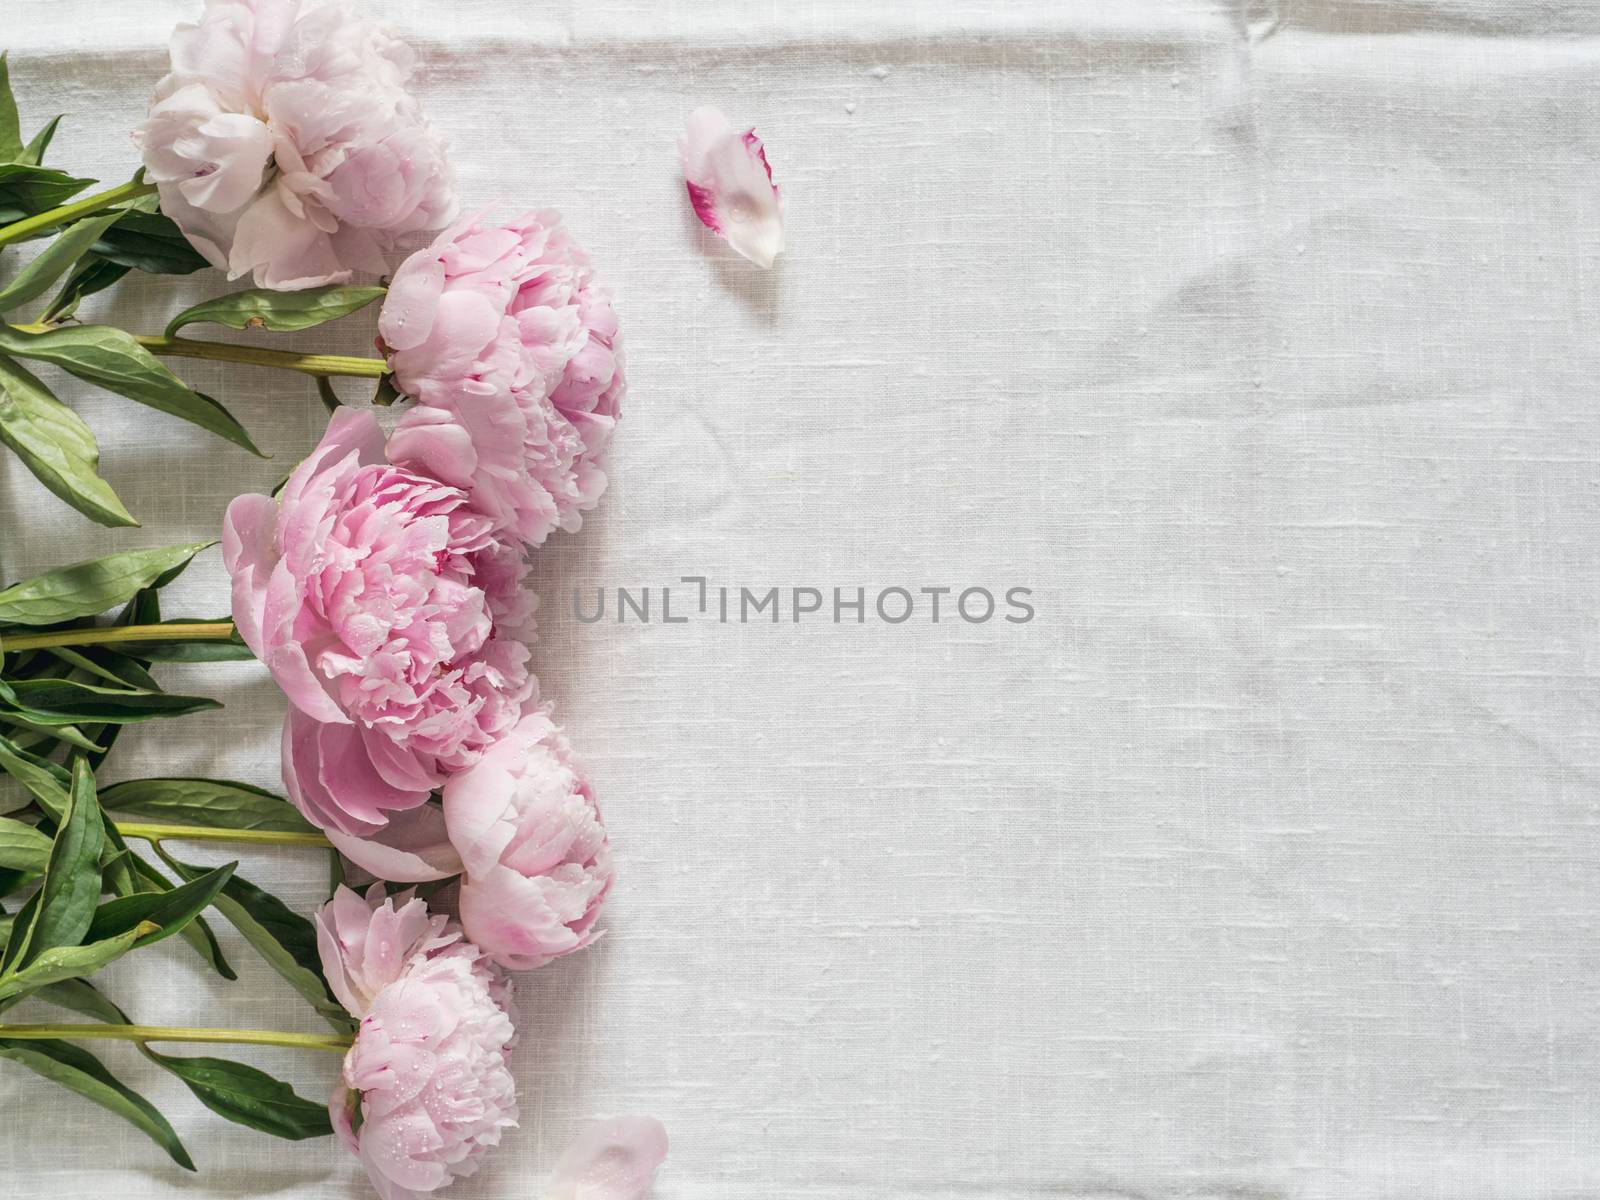 Beautiful pale pink peony. Top view of pink piones on white linen tablecloth background. Copy space for text. Flat lay. Horizontal